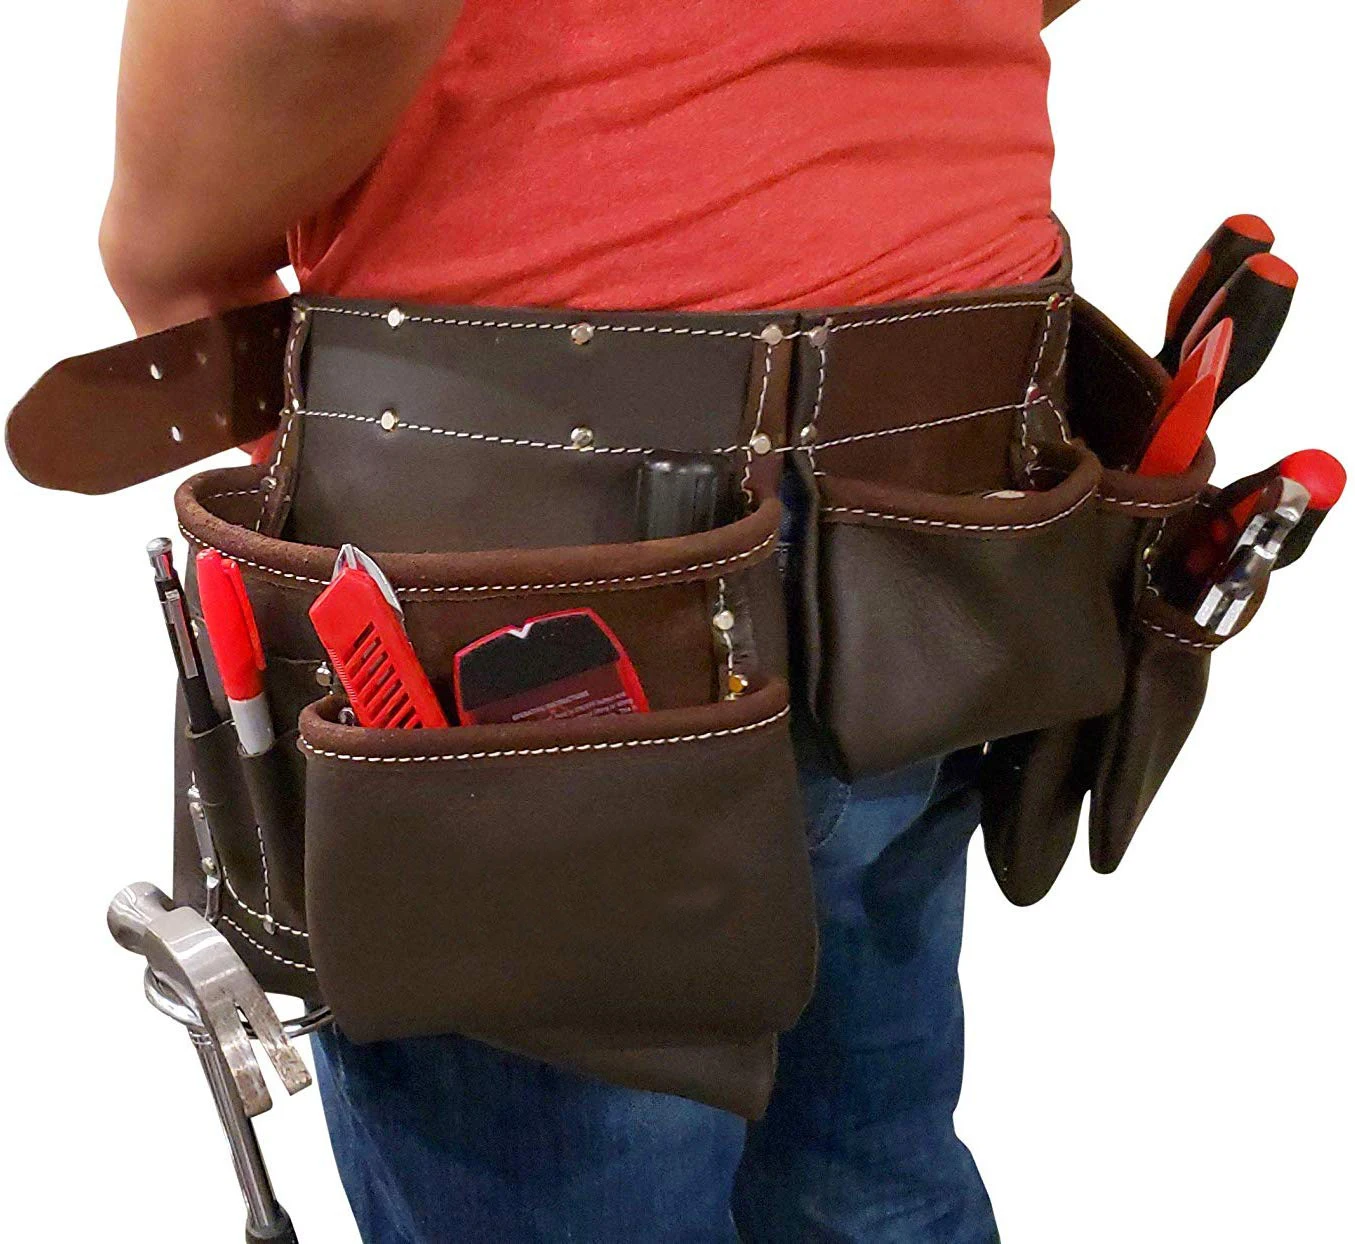 RED Heavy Duty 14 Pocket Professional Double Pouch two Tone Leather Tool Belt 